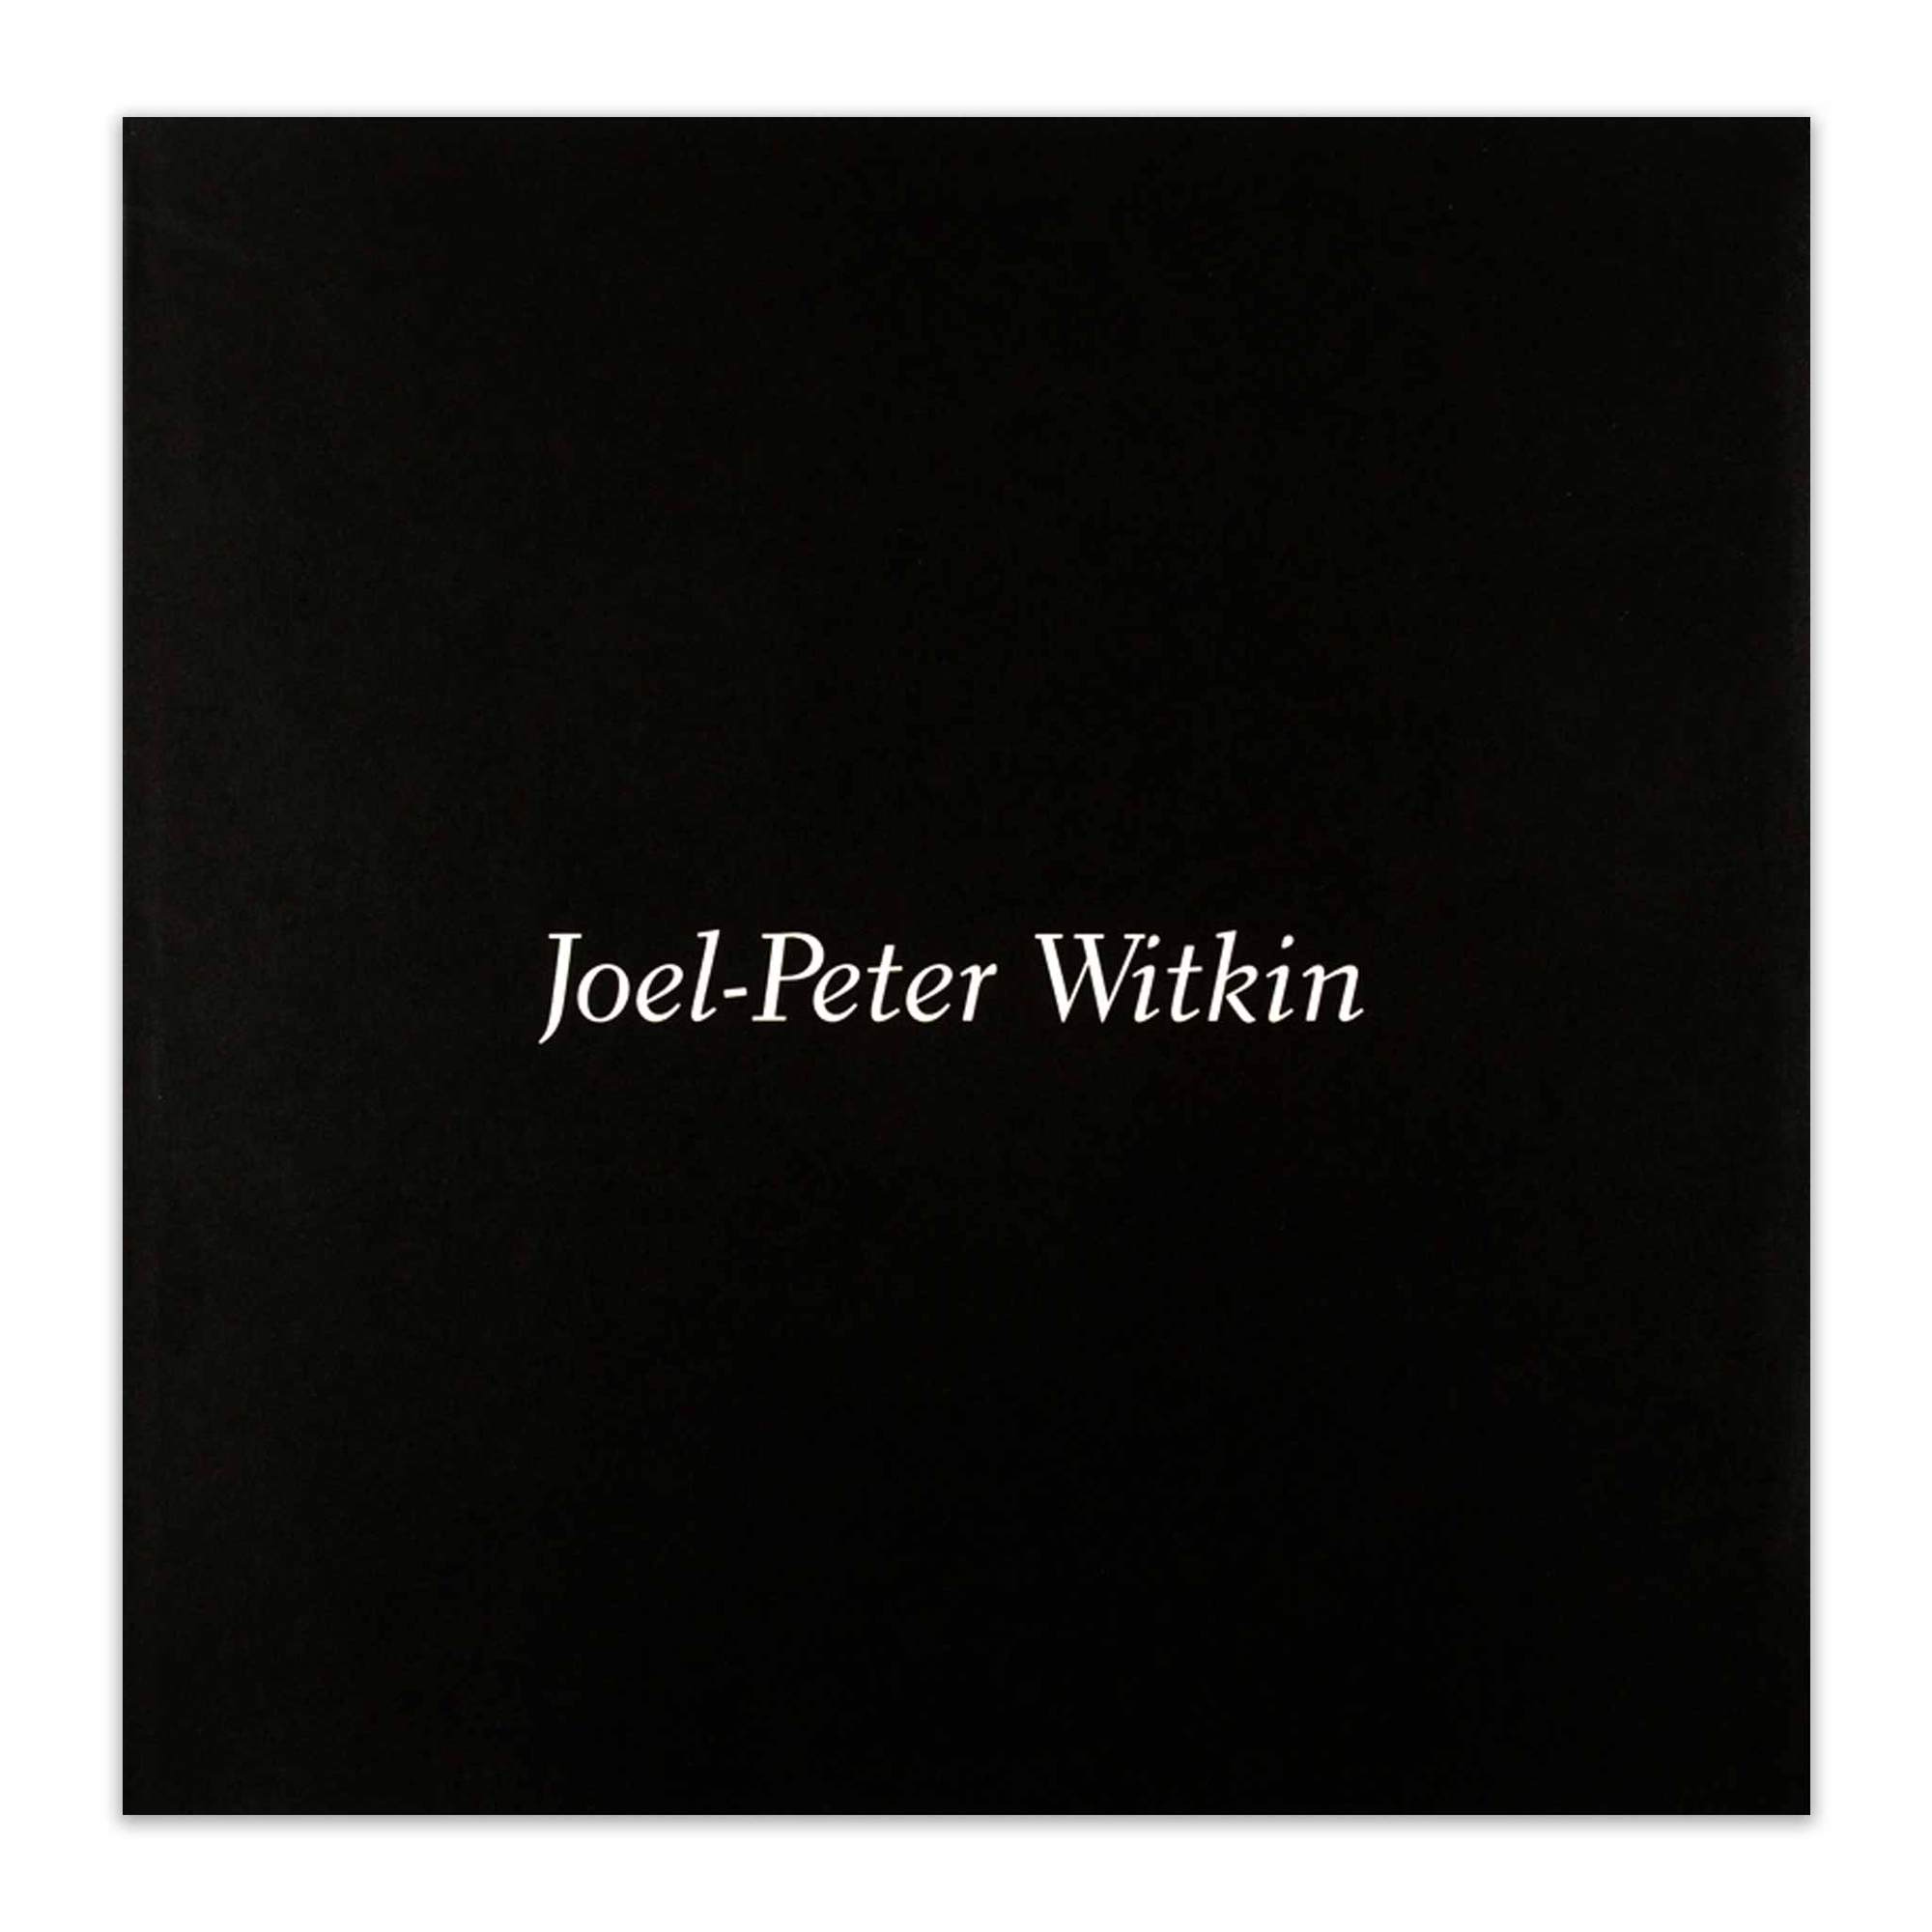 (WITKIN, JOEL-PETER). Witkin, Joel-Peter - JOEL-PETER WITKIN - DELUXE SIGNED SLIPCASED EDITION OF THE PHOTOGRAPHER'S FIRST BOOK LIMITED TO ONE HUNDRED COPIES